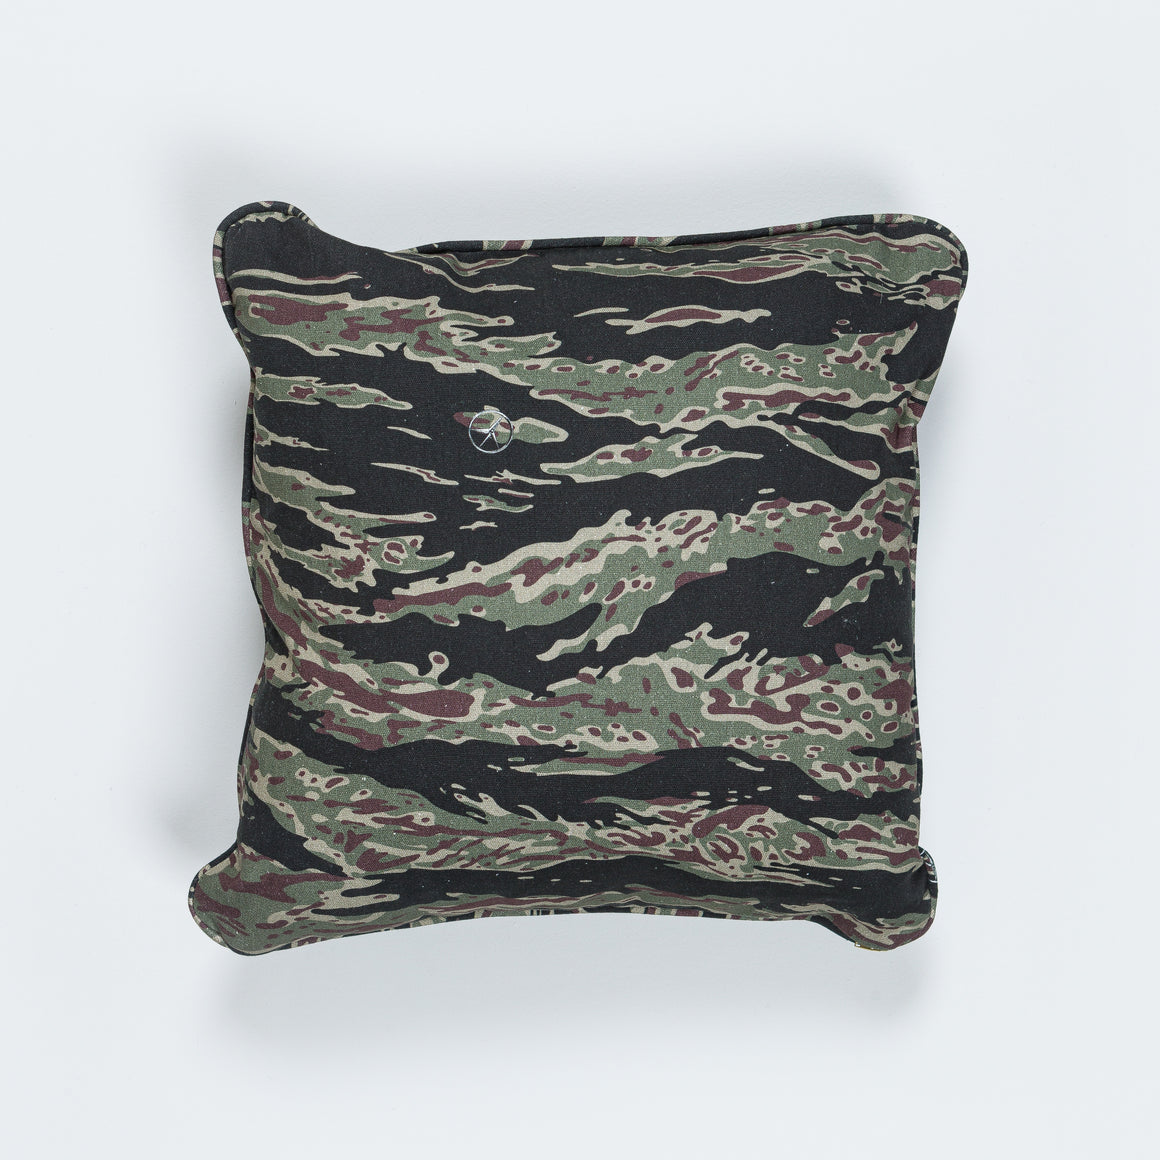 For The Homies - Camouflage Cushion - UP THERE